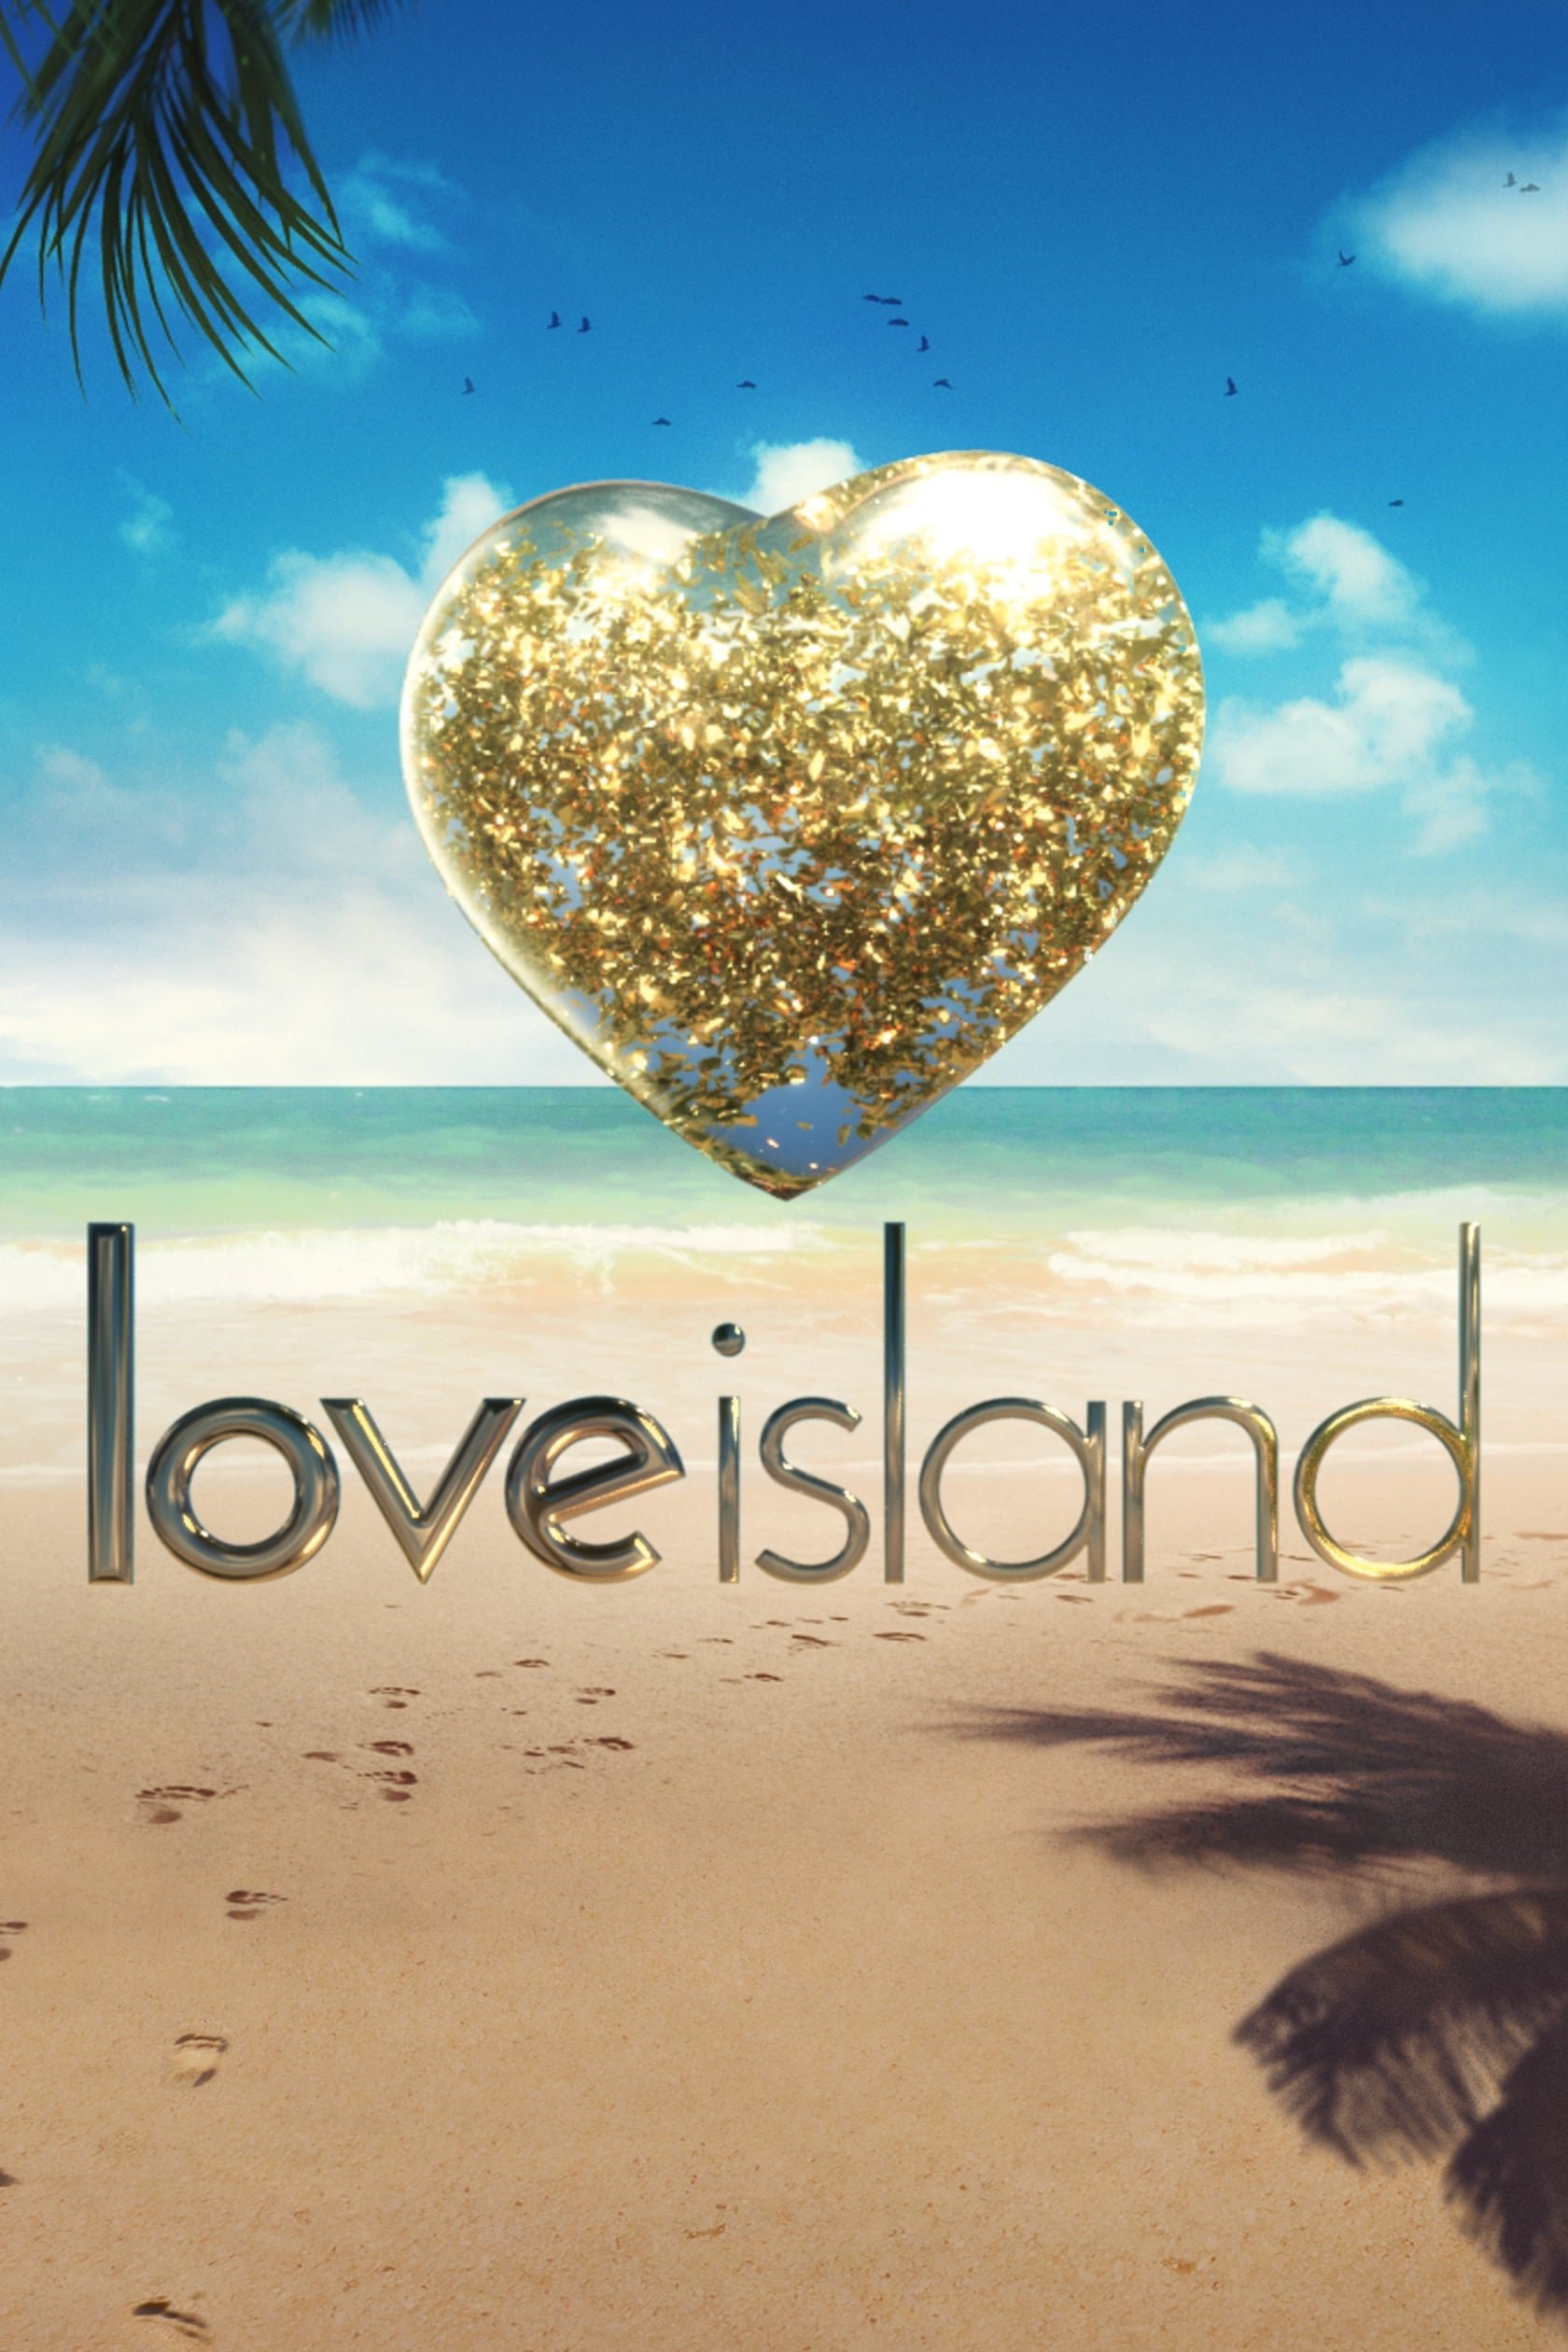 Love Island (2015) TV Show Poster ID 359656 Image Abyss